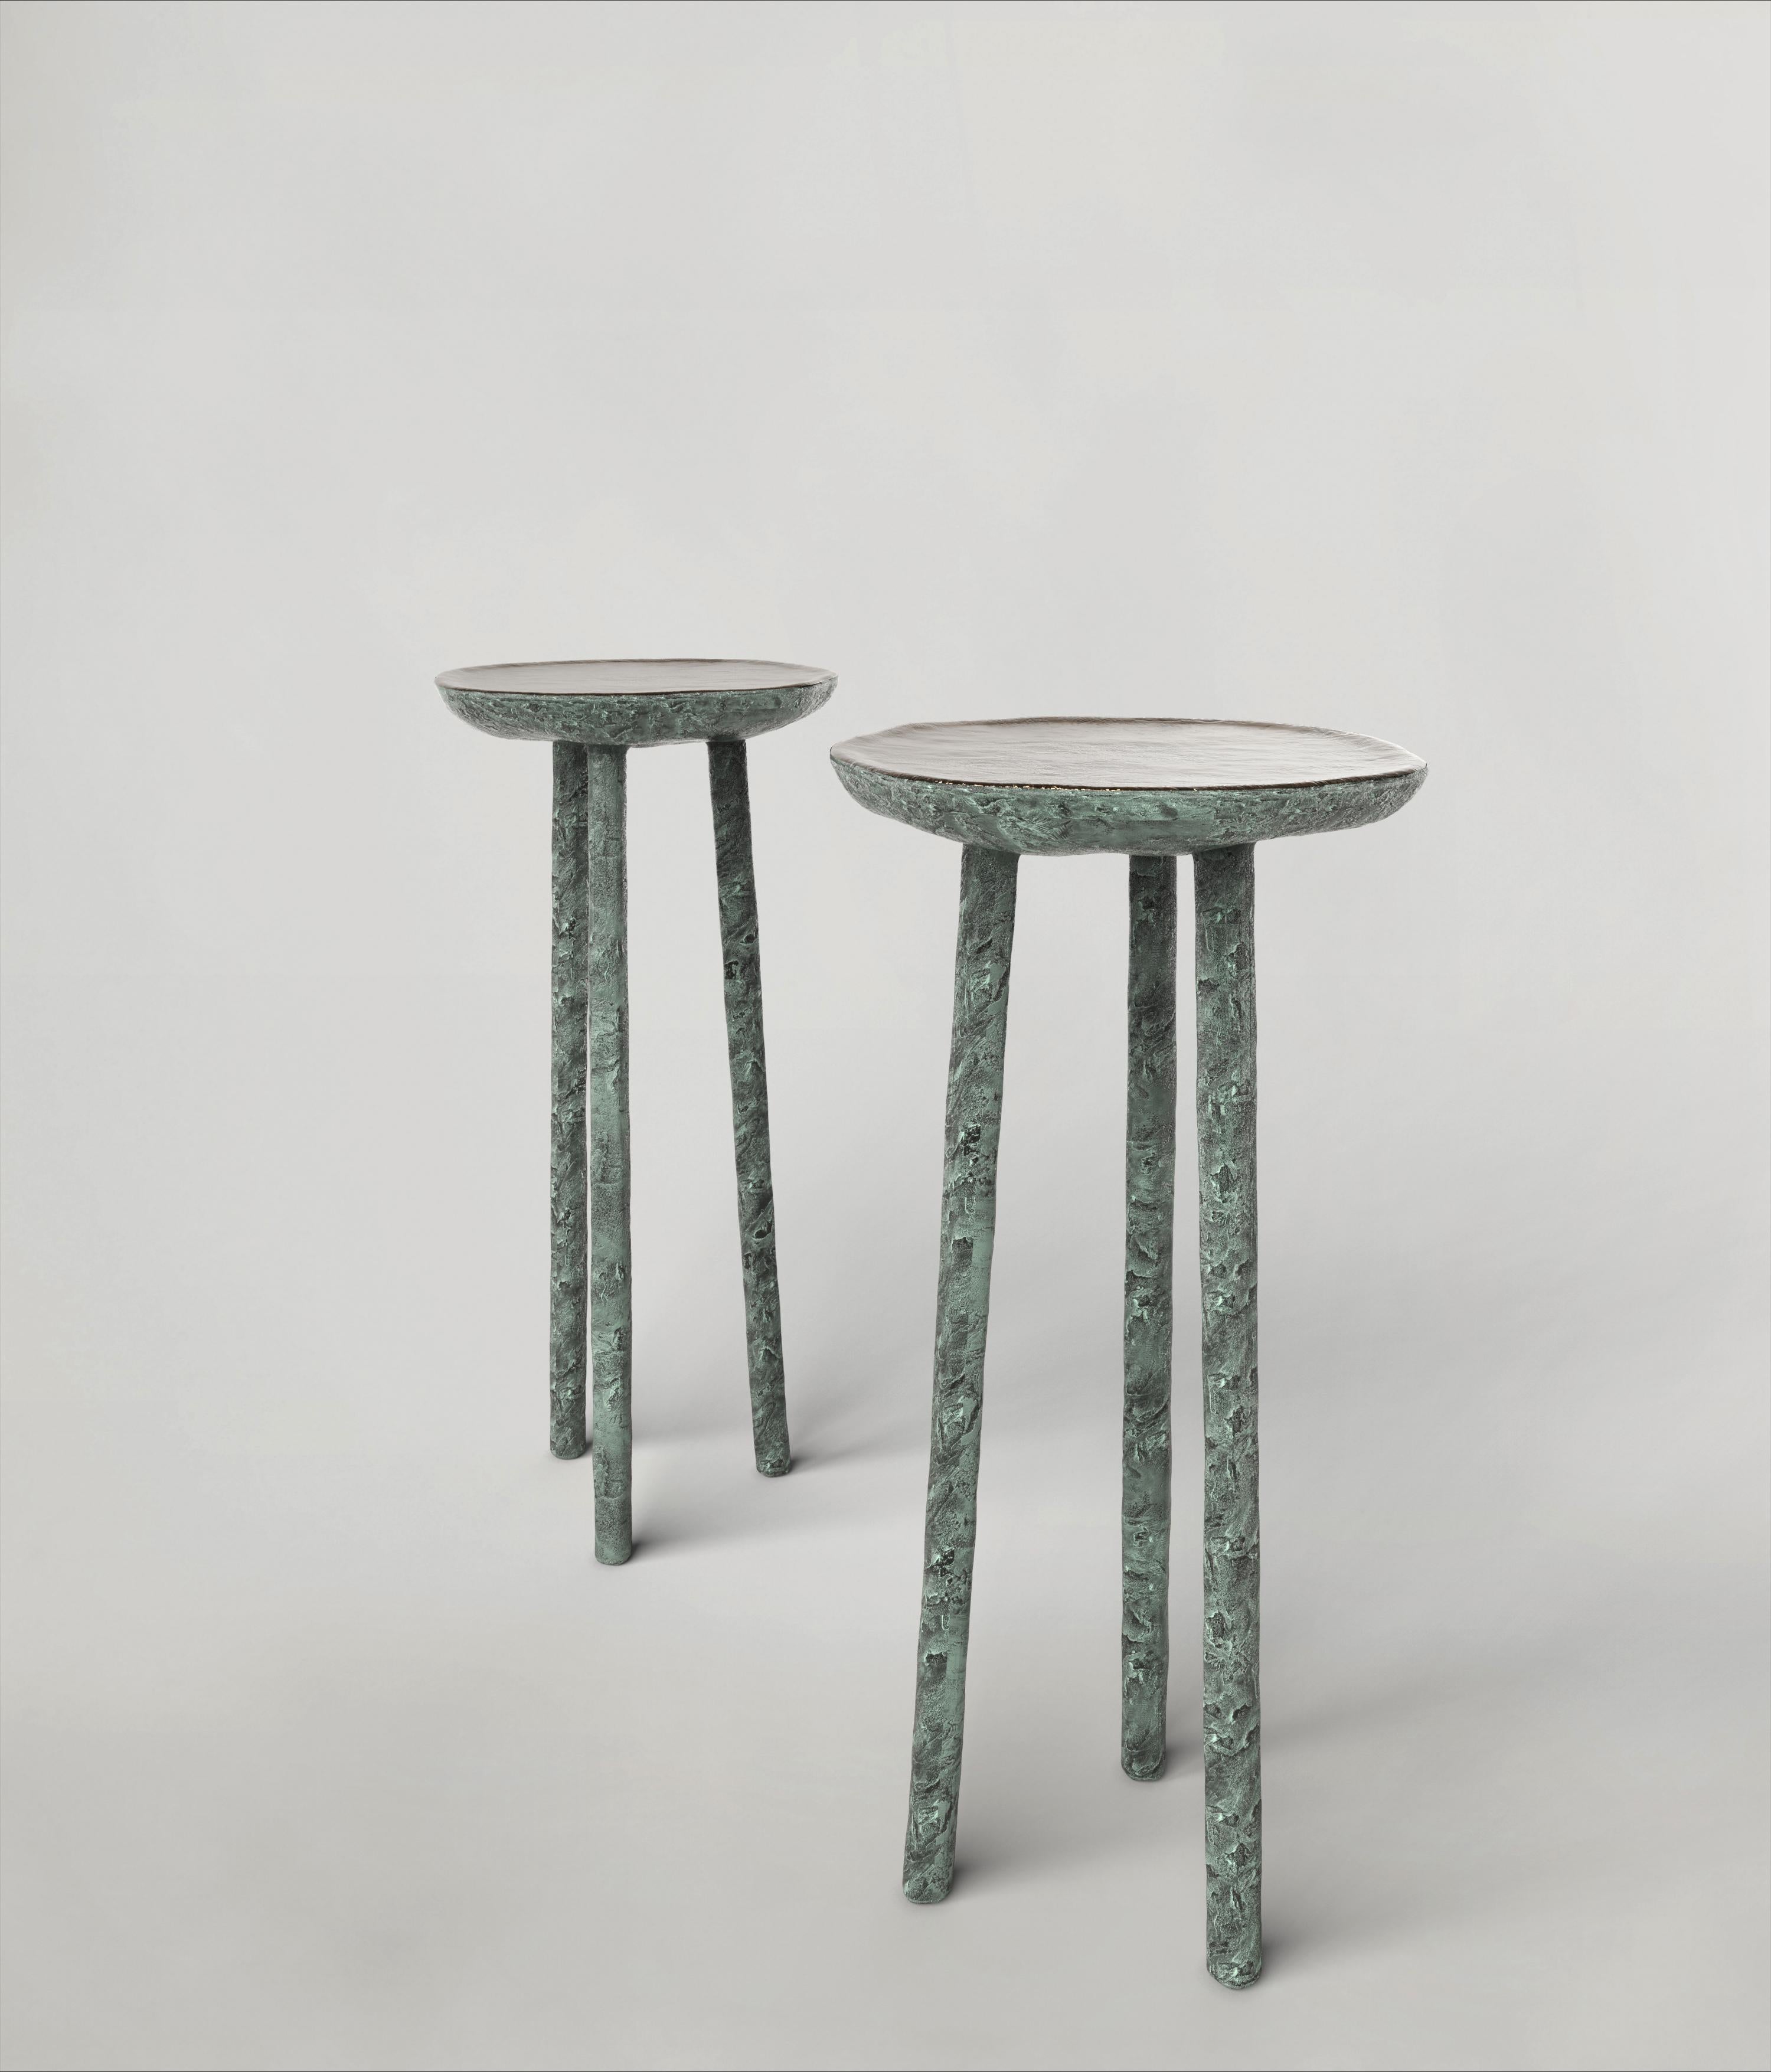 Set of 2 Comma V3 high stools by Edizione Limitata
Limited edition of 150 pieces. Signed and numbered.
Dimensions: D 90 x W 40 x H 130 cm
Materials: green patina bronze

Comma is a 21st Century collection of seatings made by Italian artisans in